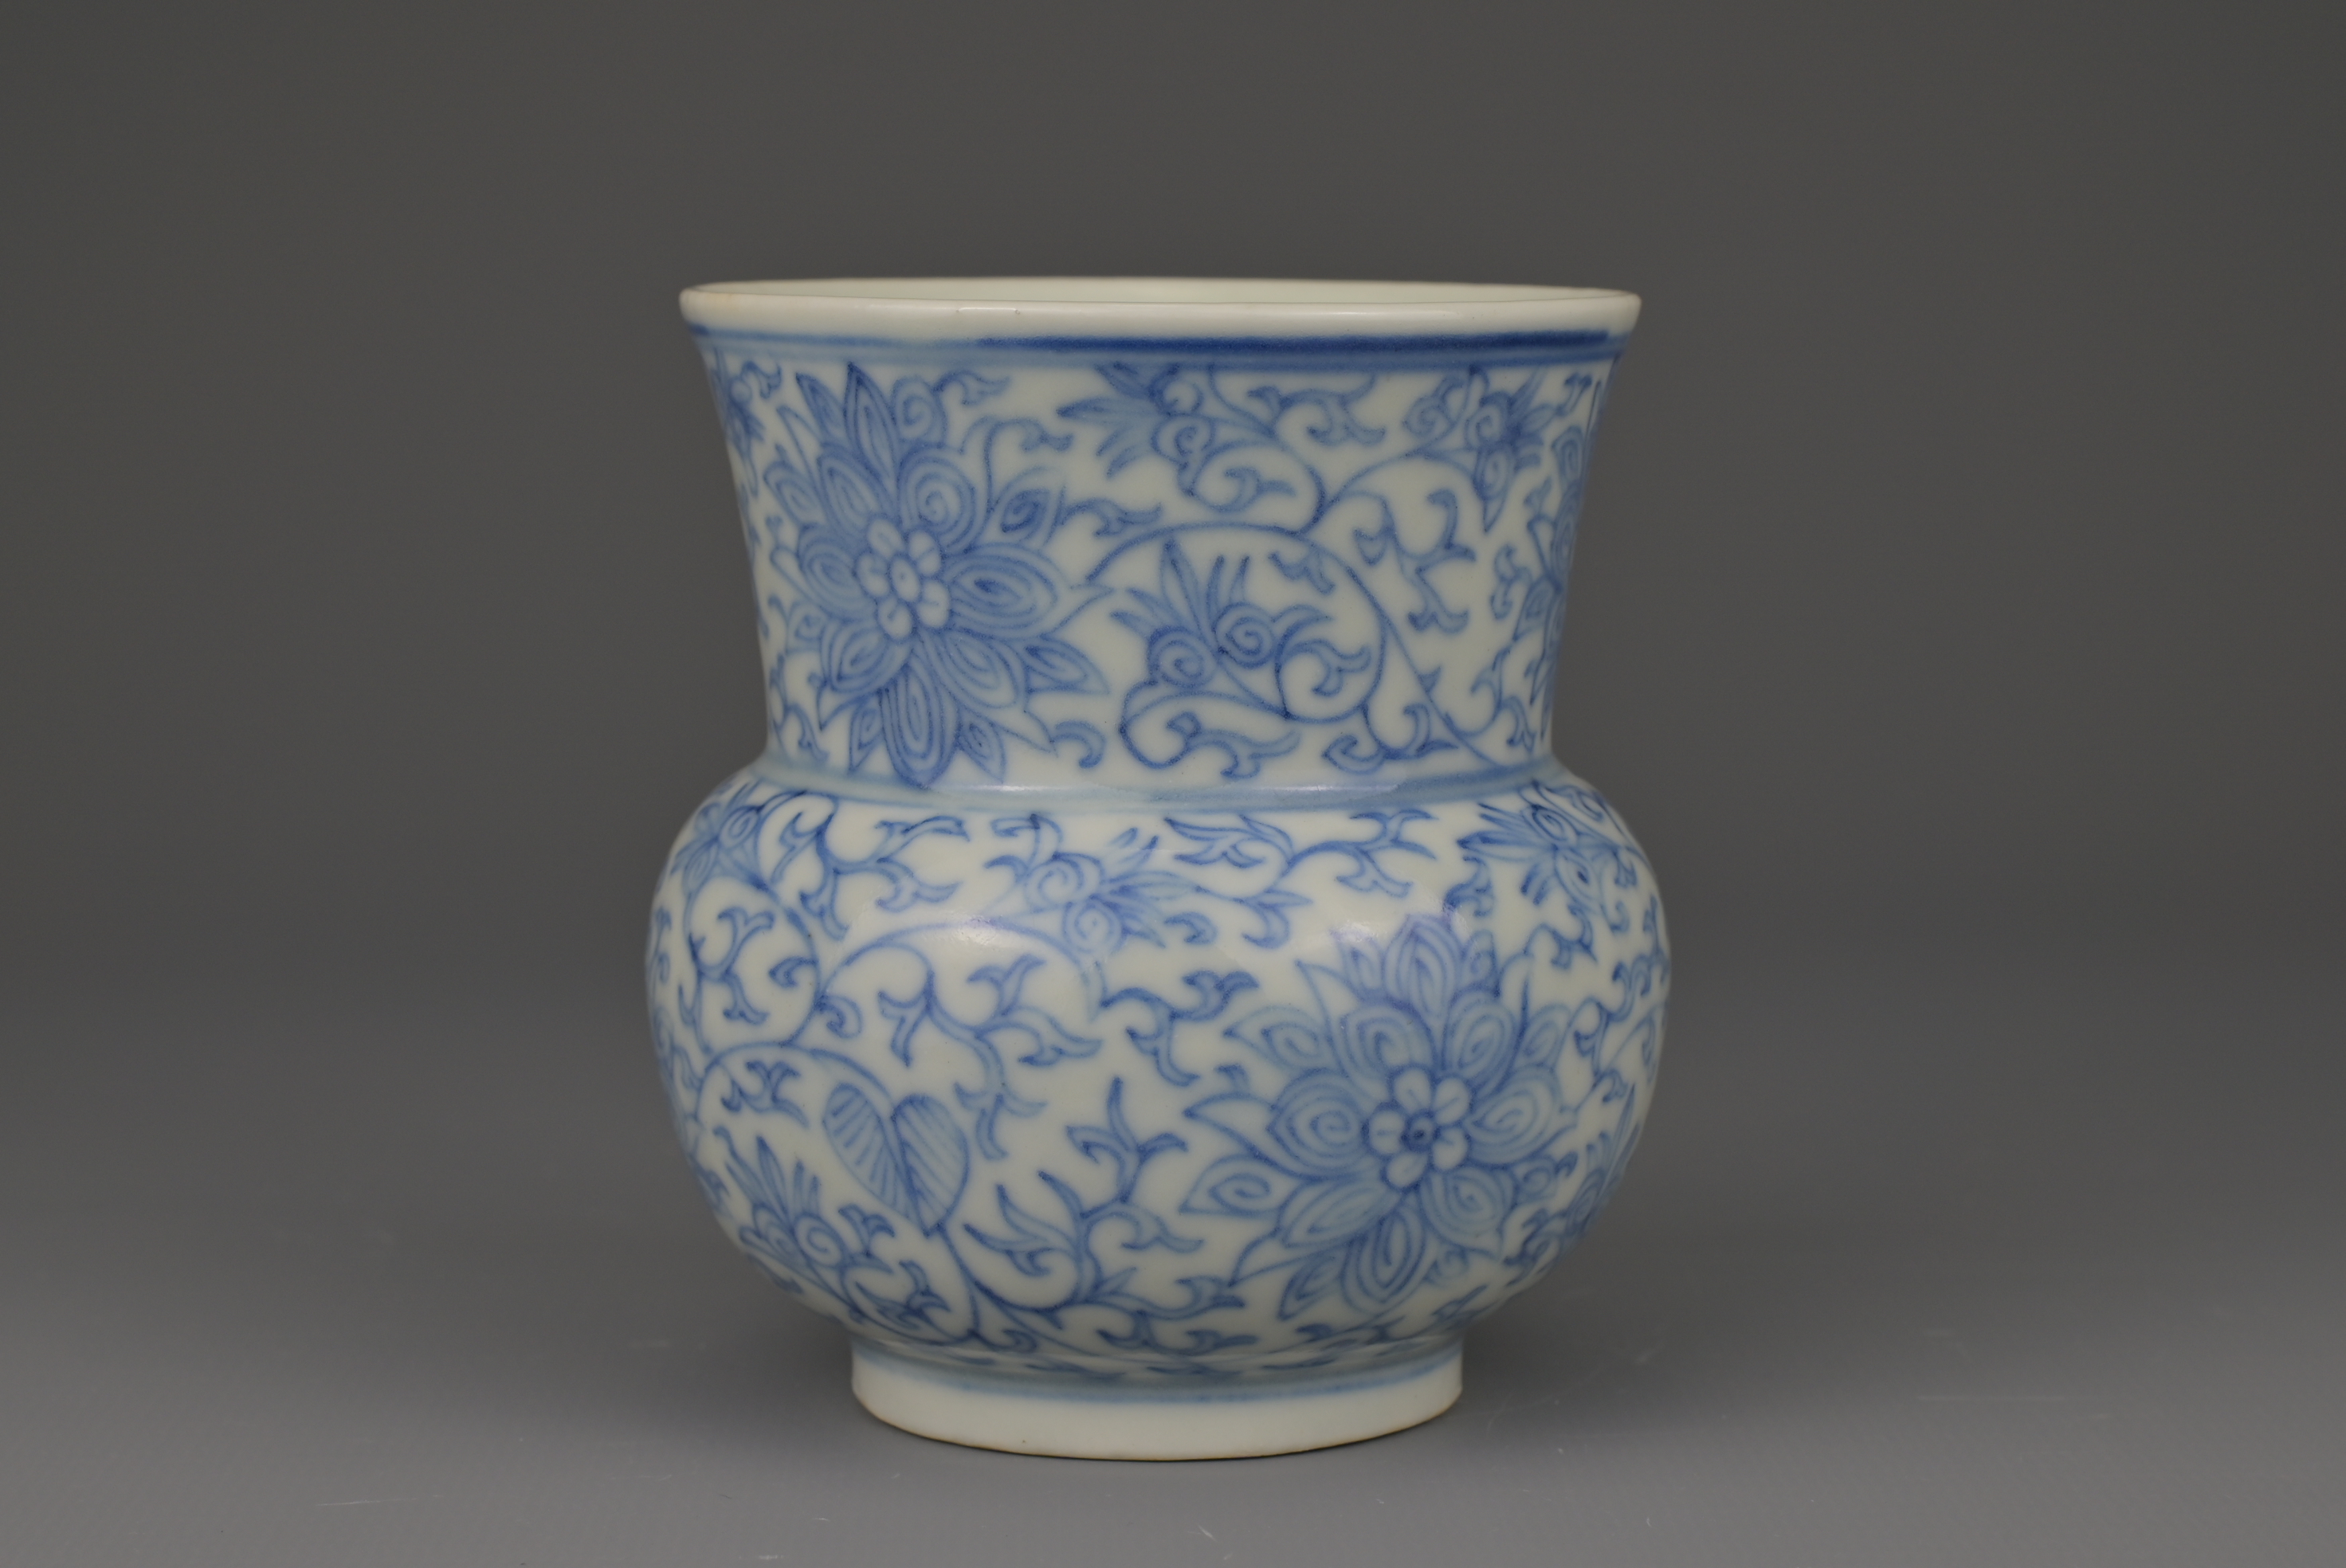 CHINESE BLUE AND WHITE PORCELAIN SPITTOON ‘ZHADOU’, JIAQING PERIOD, EARLY 19th CENTURY - Image 4 of 8